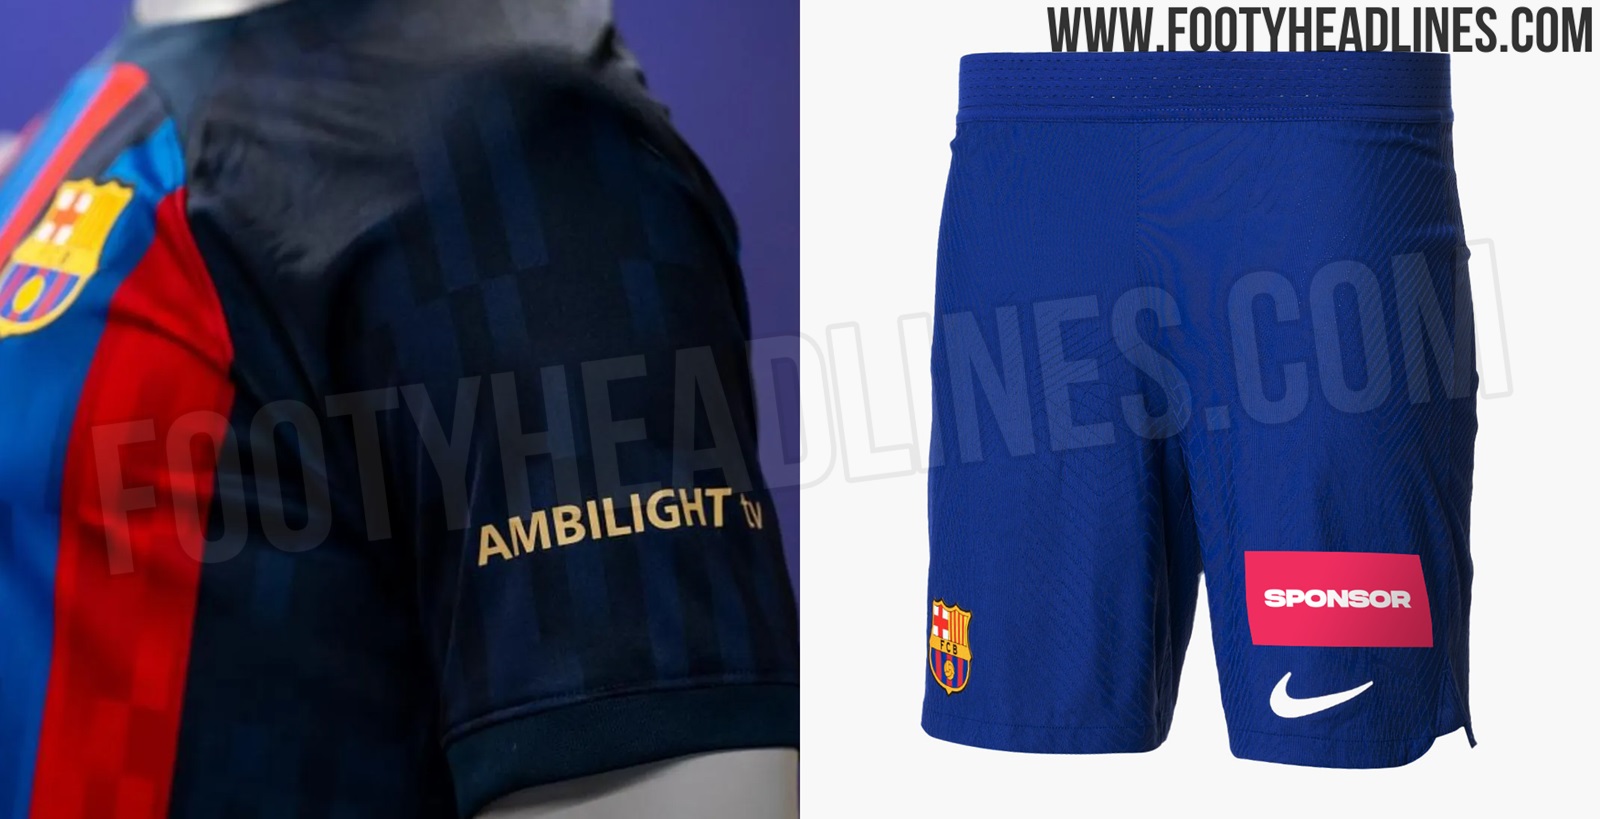 Confirmed: TP Vision strikes Ambilight TV sleeve sponsorship with Barça -  Sportcal